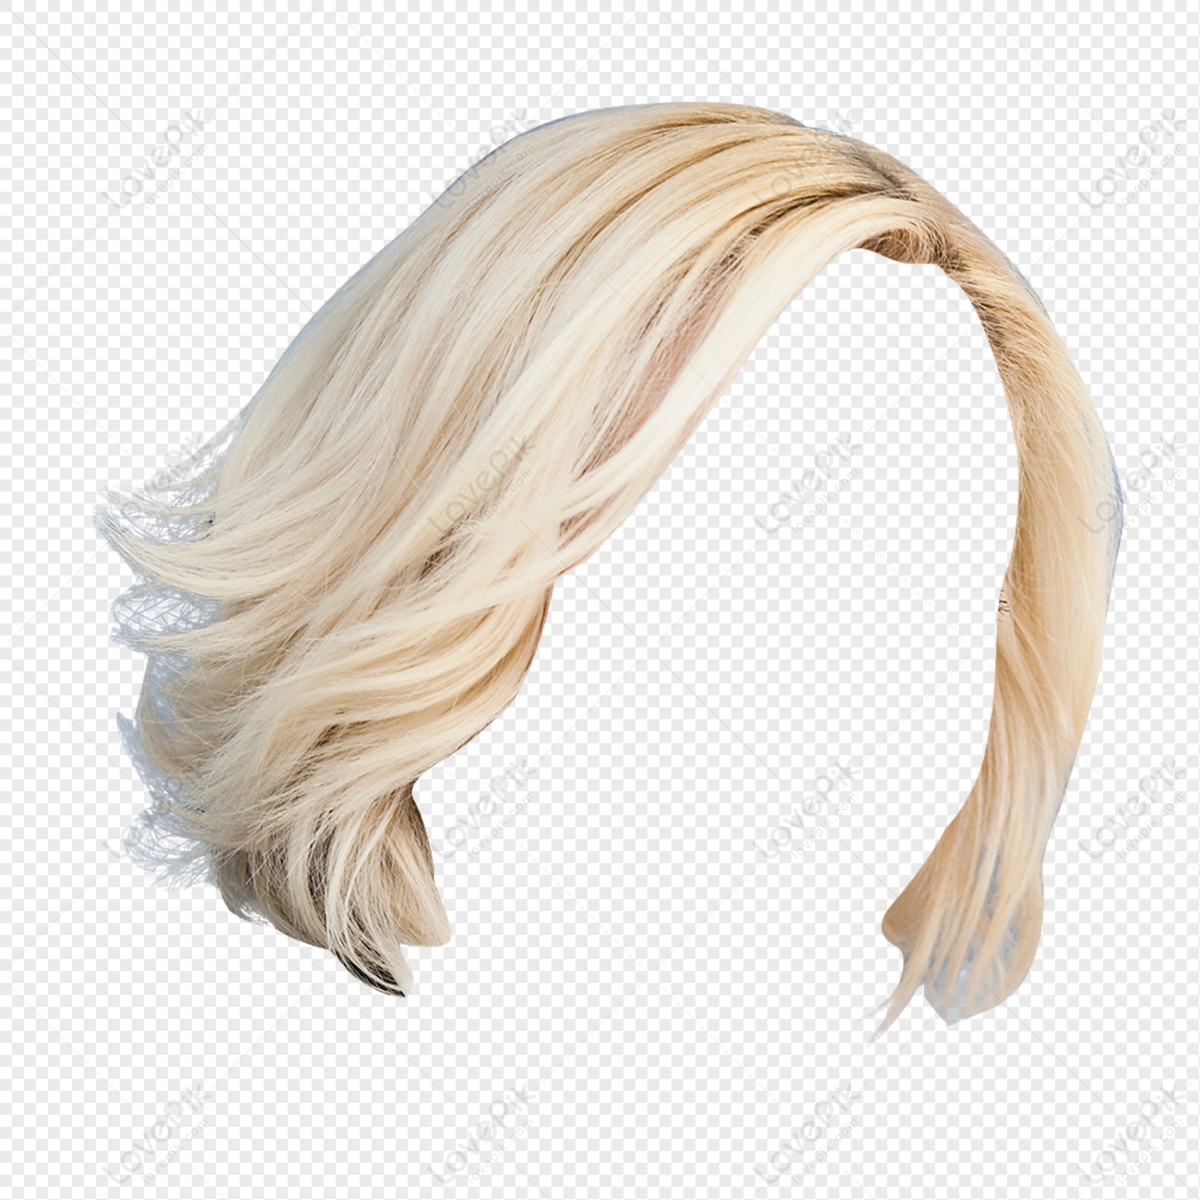 Blond Lady Hair Hairstyle Wig Free PNG And Clipart Image For Free Download  - Lovepik | 401770219